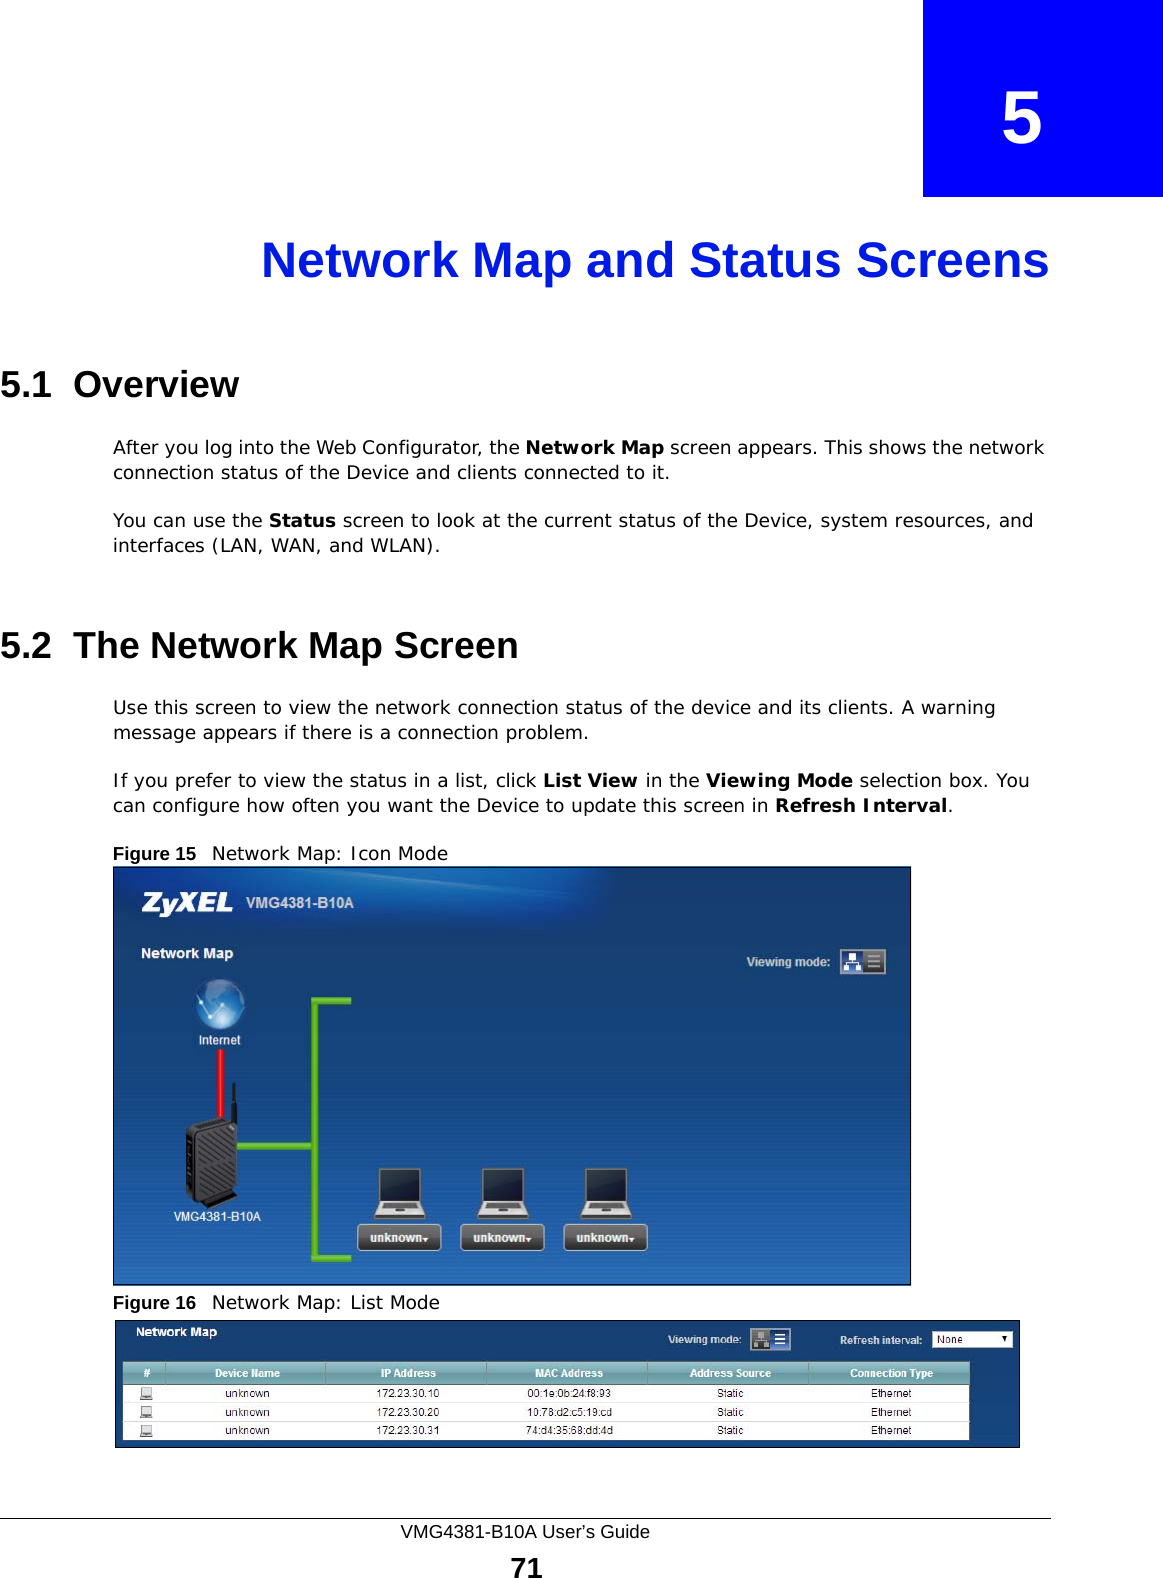 VMG4381-B10A User’s Guide71CHAPTER   5Network Map and Status Screens5.1  OverviewAfter you log into the Web Configurator, the Network Map screen appears. This shows the network connection status of the Device and clients connected to it. You can use the Status screen to look at the current status of the Device, system resources, and interfaces (LAN, WAN, and WLAN). 5.2  The Network Map ScreenUse this screen to view the network connection status of the device and its clients. A warning message appears if there is a connection problem. If you prefer to view the status in a list, click List View in the Viewing Mode selection box. You can configure how often you want the Device to update this screen in Refresh Interval.Figure 15   Network Map: Icon Mode Figure 16   Network Map: List Mode